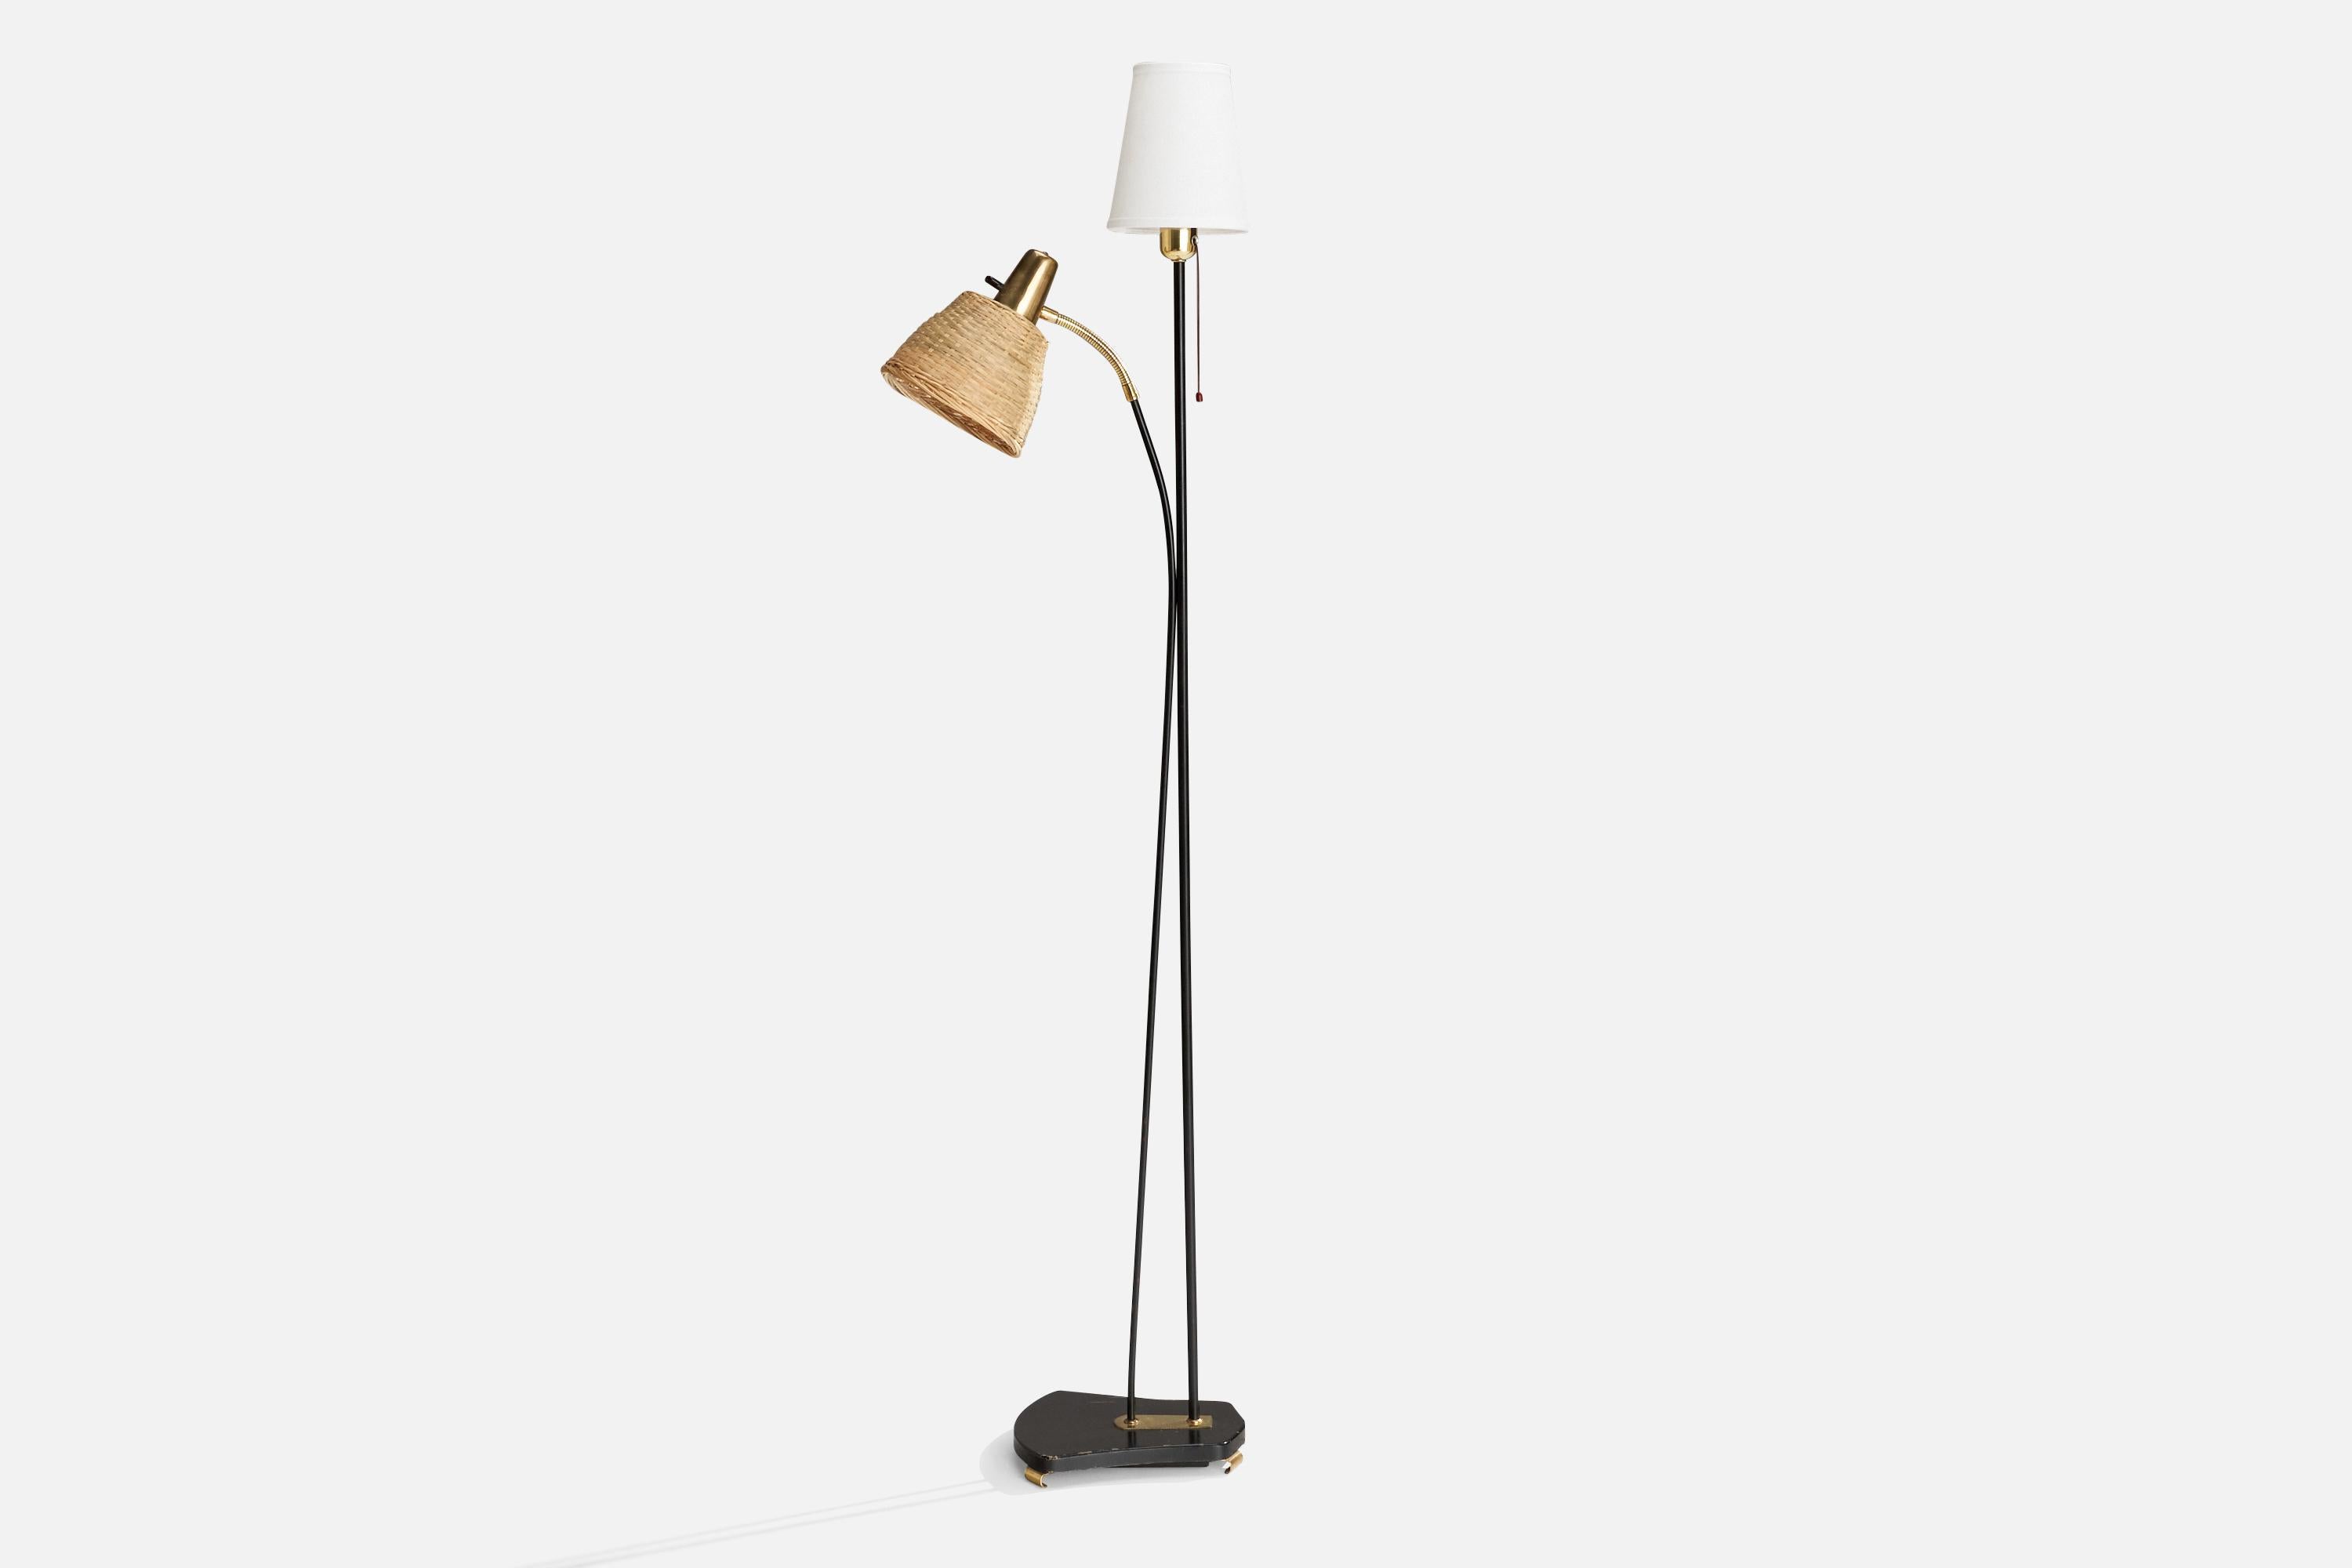 A brass, rattan, fabric and black metal floor lamp produced by Eskilstuna Elektrofabrik, 1950s.

Dimensions variable 
Overall Dimensions (inches): 62” H x 9” W x 16” D
Stated dimensions include shade.
Bulb Specifications: E-26 Bulb
Number of